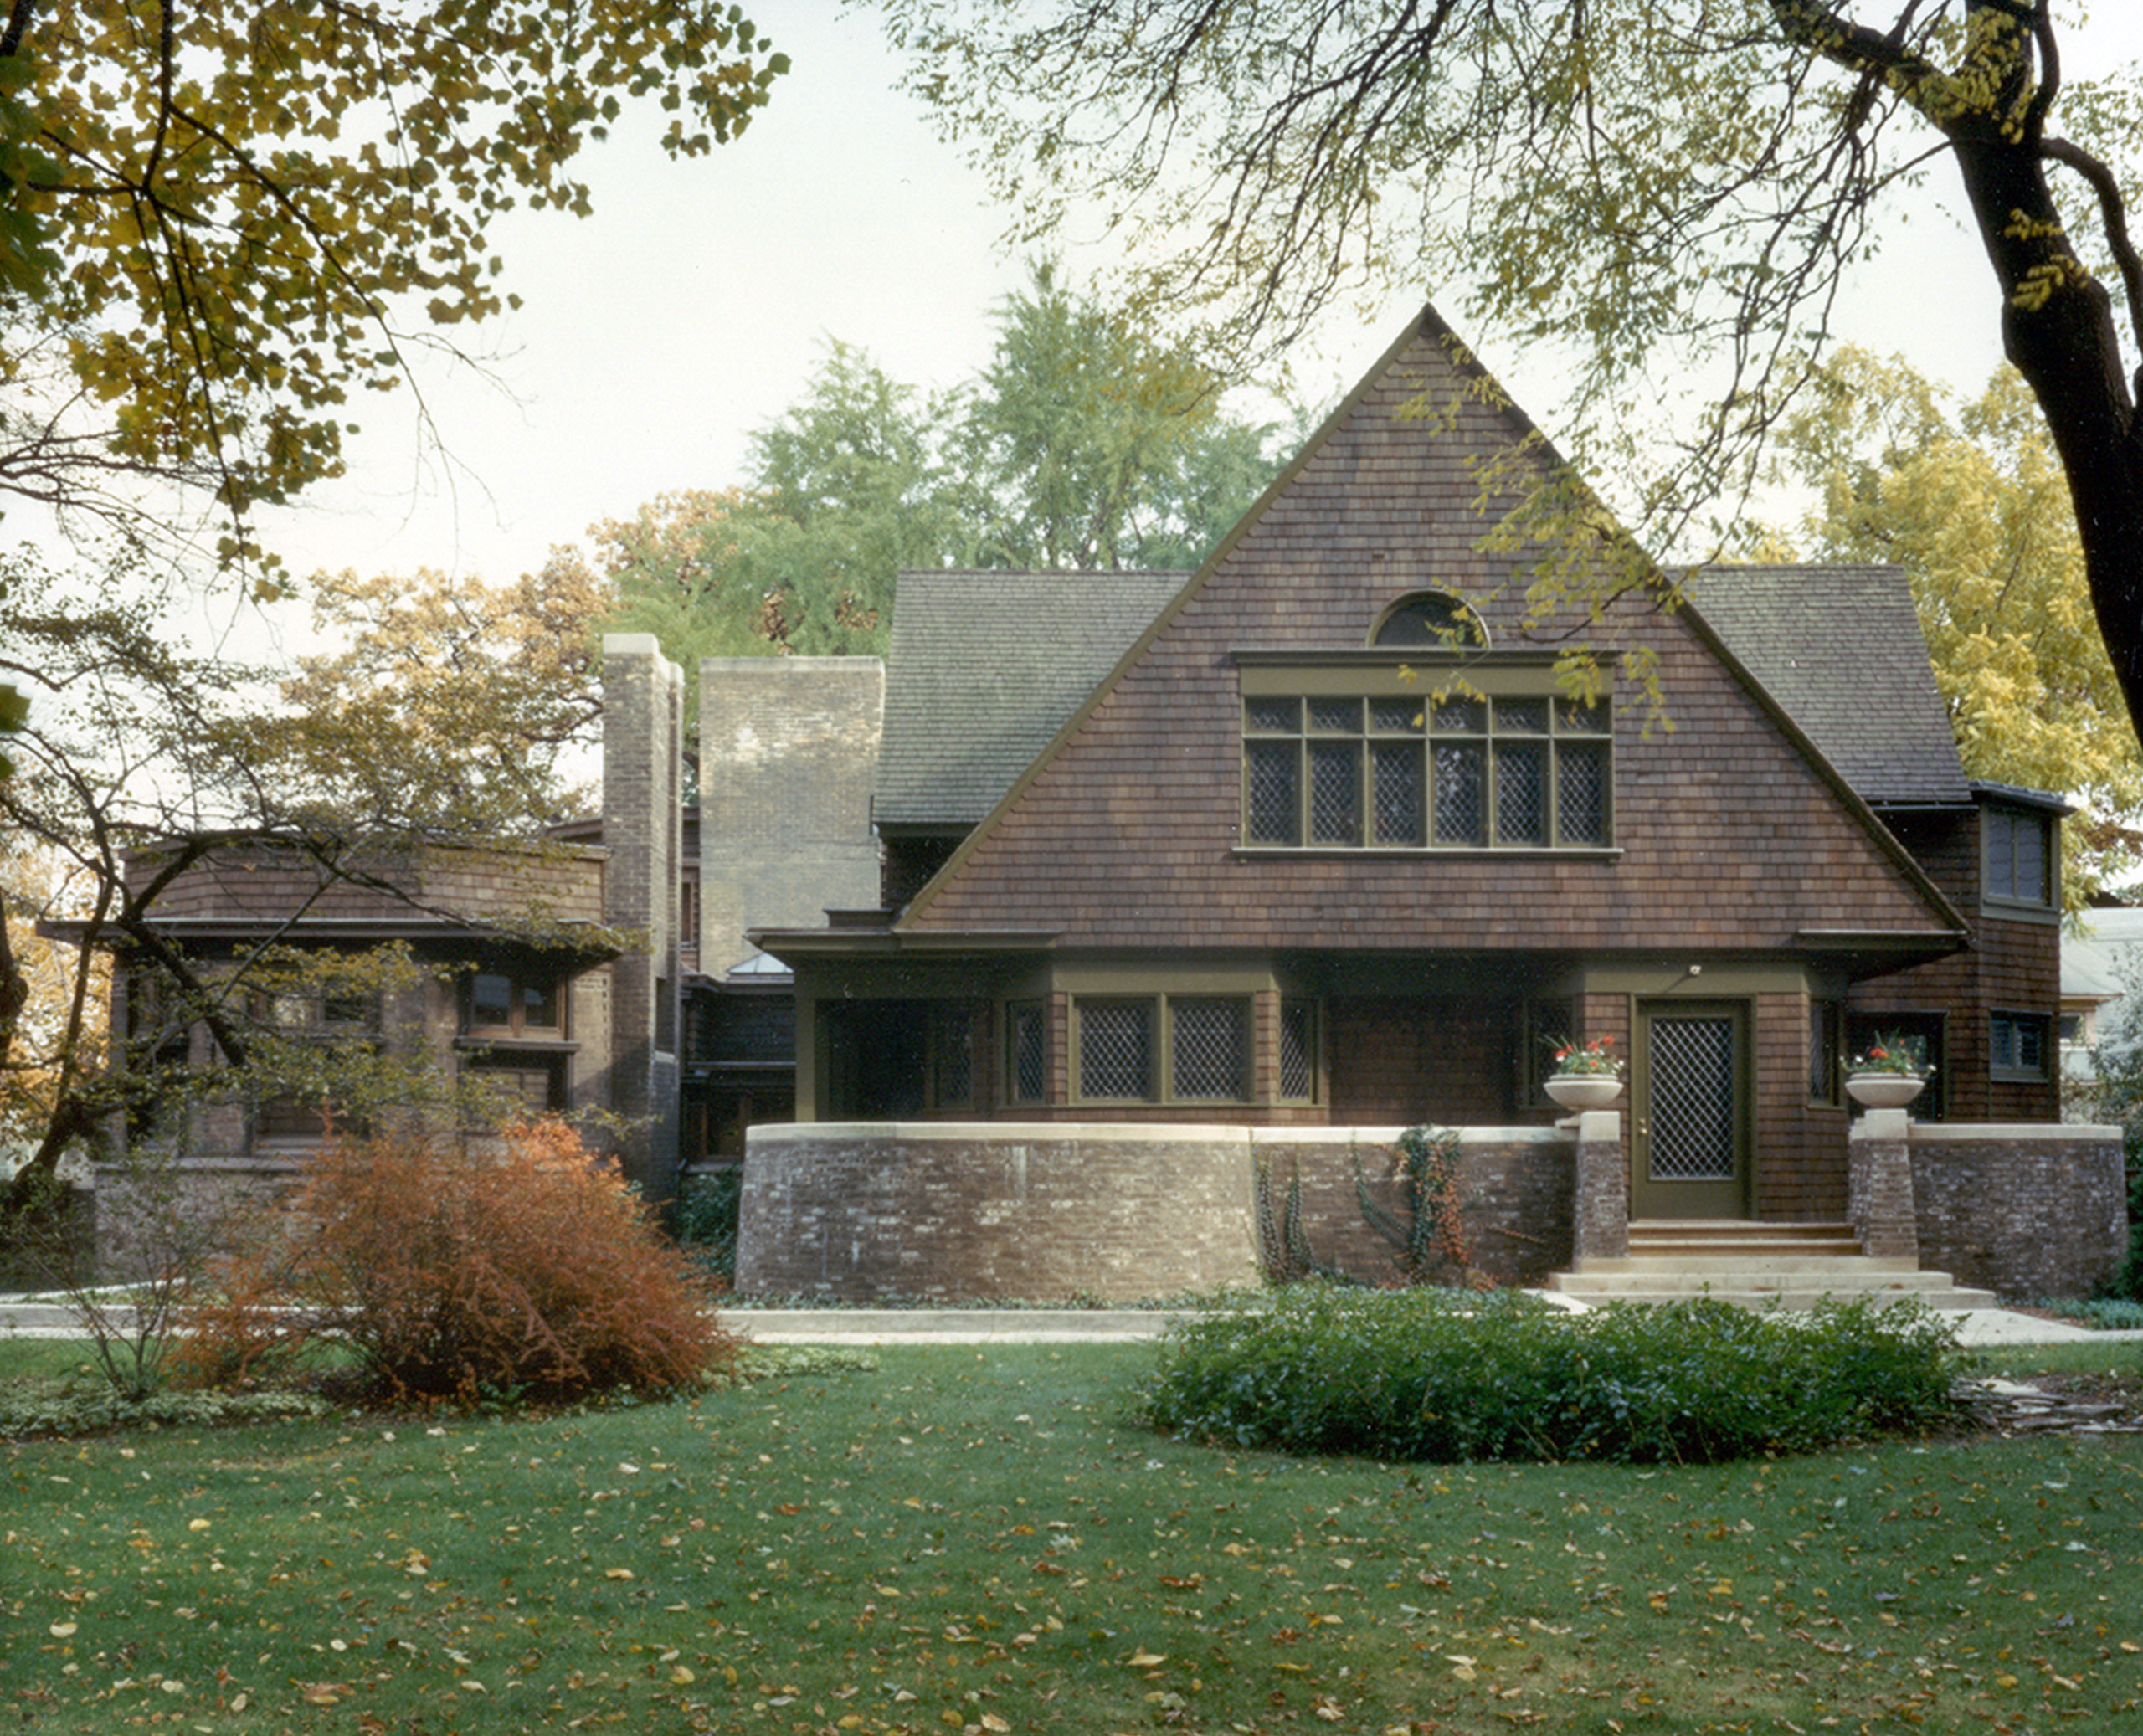 Frank Lloyd Wright's home and studio, located at 951 Chicago Avenue, Oak Park, Ill. Built circa 1889.